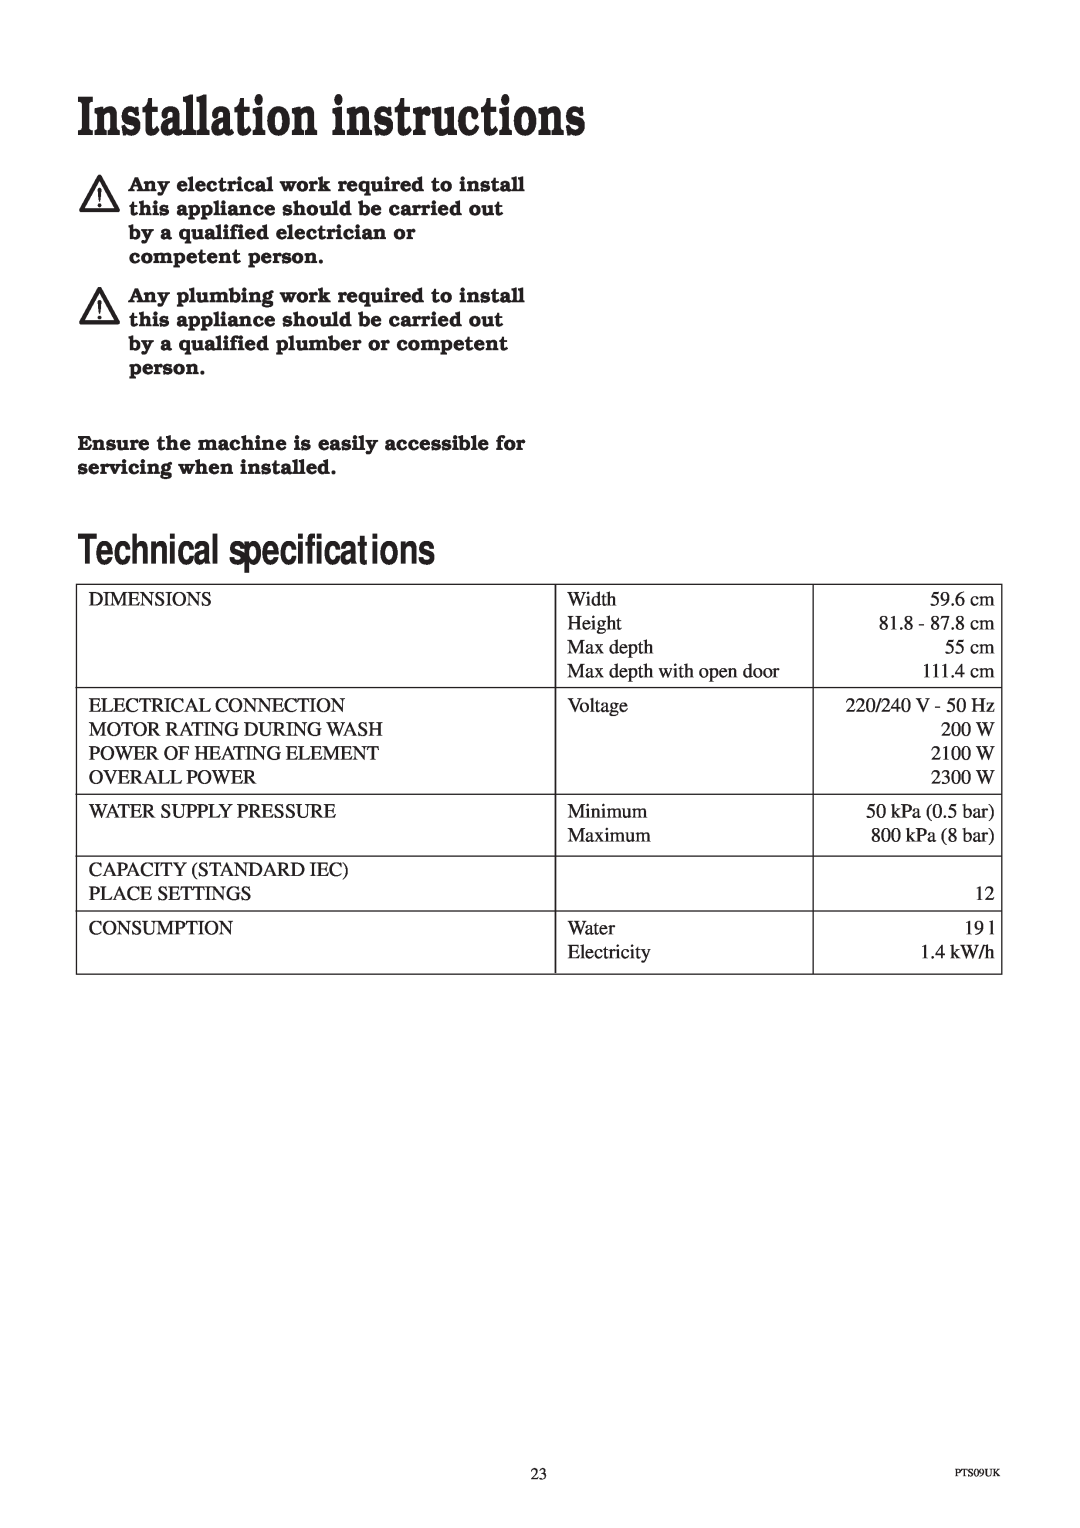 Zanussi ZT 685 manual Installation instructions, Technical specifications 